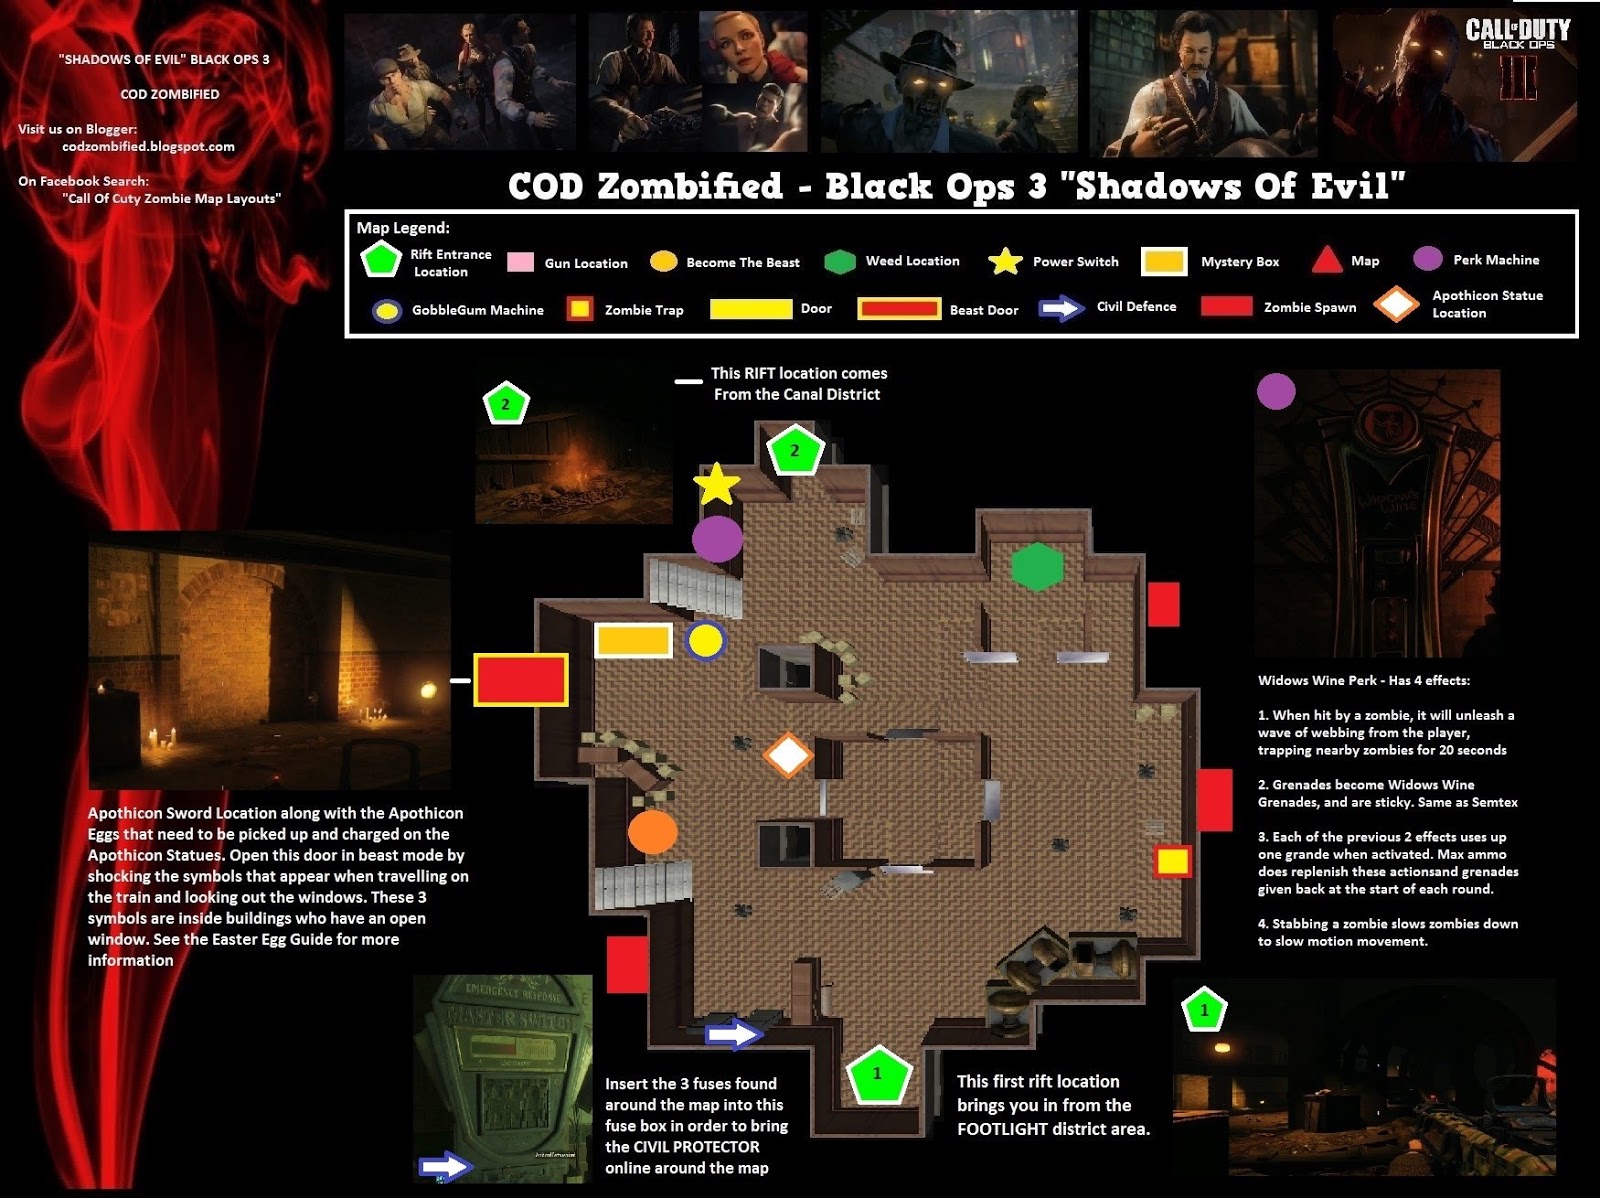 Zombified - Call Of Duty Zombie Map Layouts, Secrets, Easter Eggs and Walkthrough Guides: The Rift Area Map Layout for Shadows Of Evil - Call Of Duty Black Ops 3 Zombies